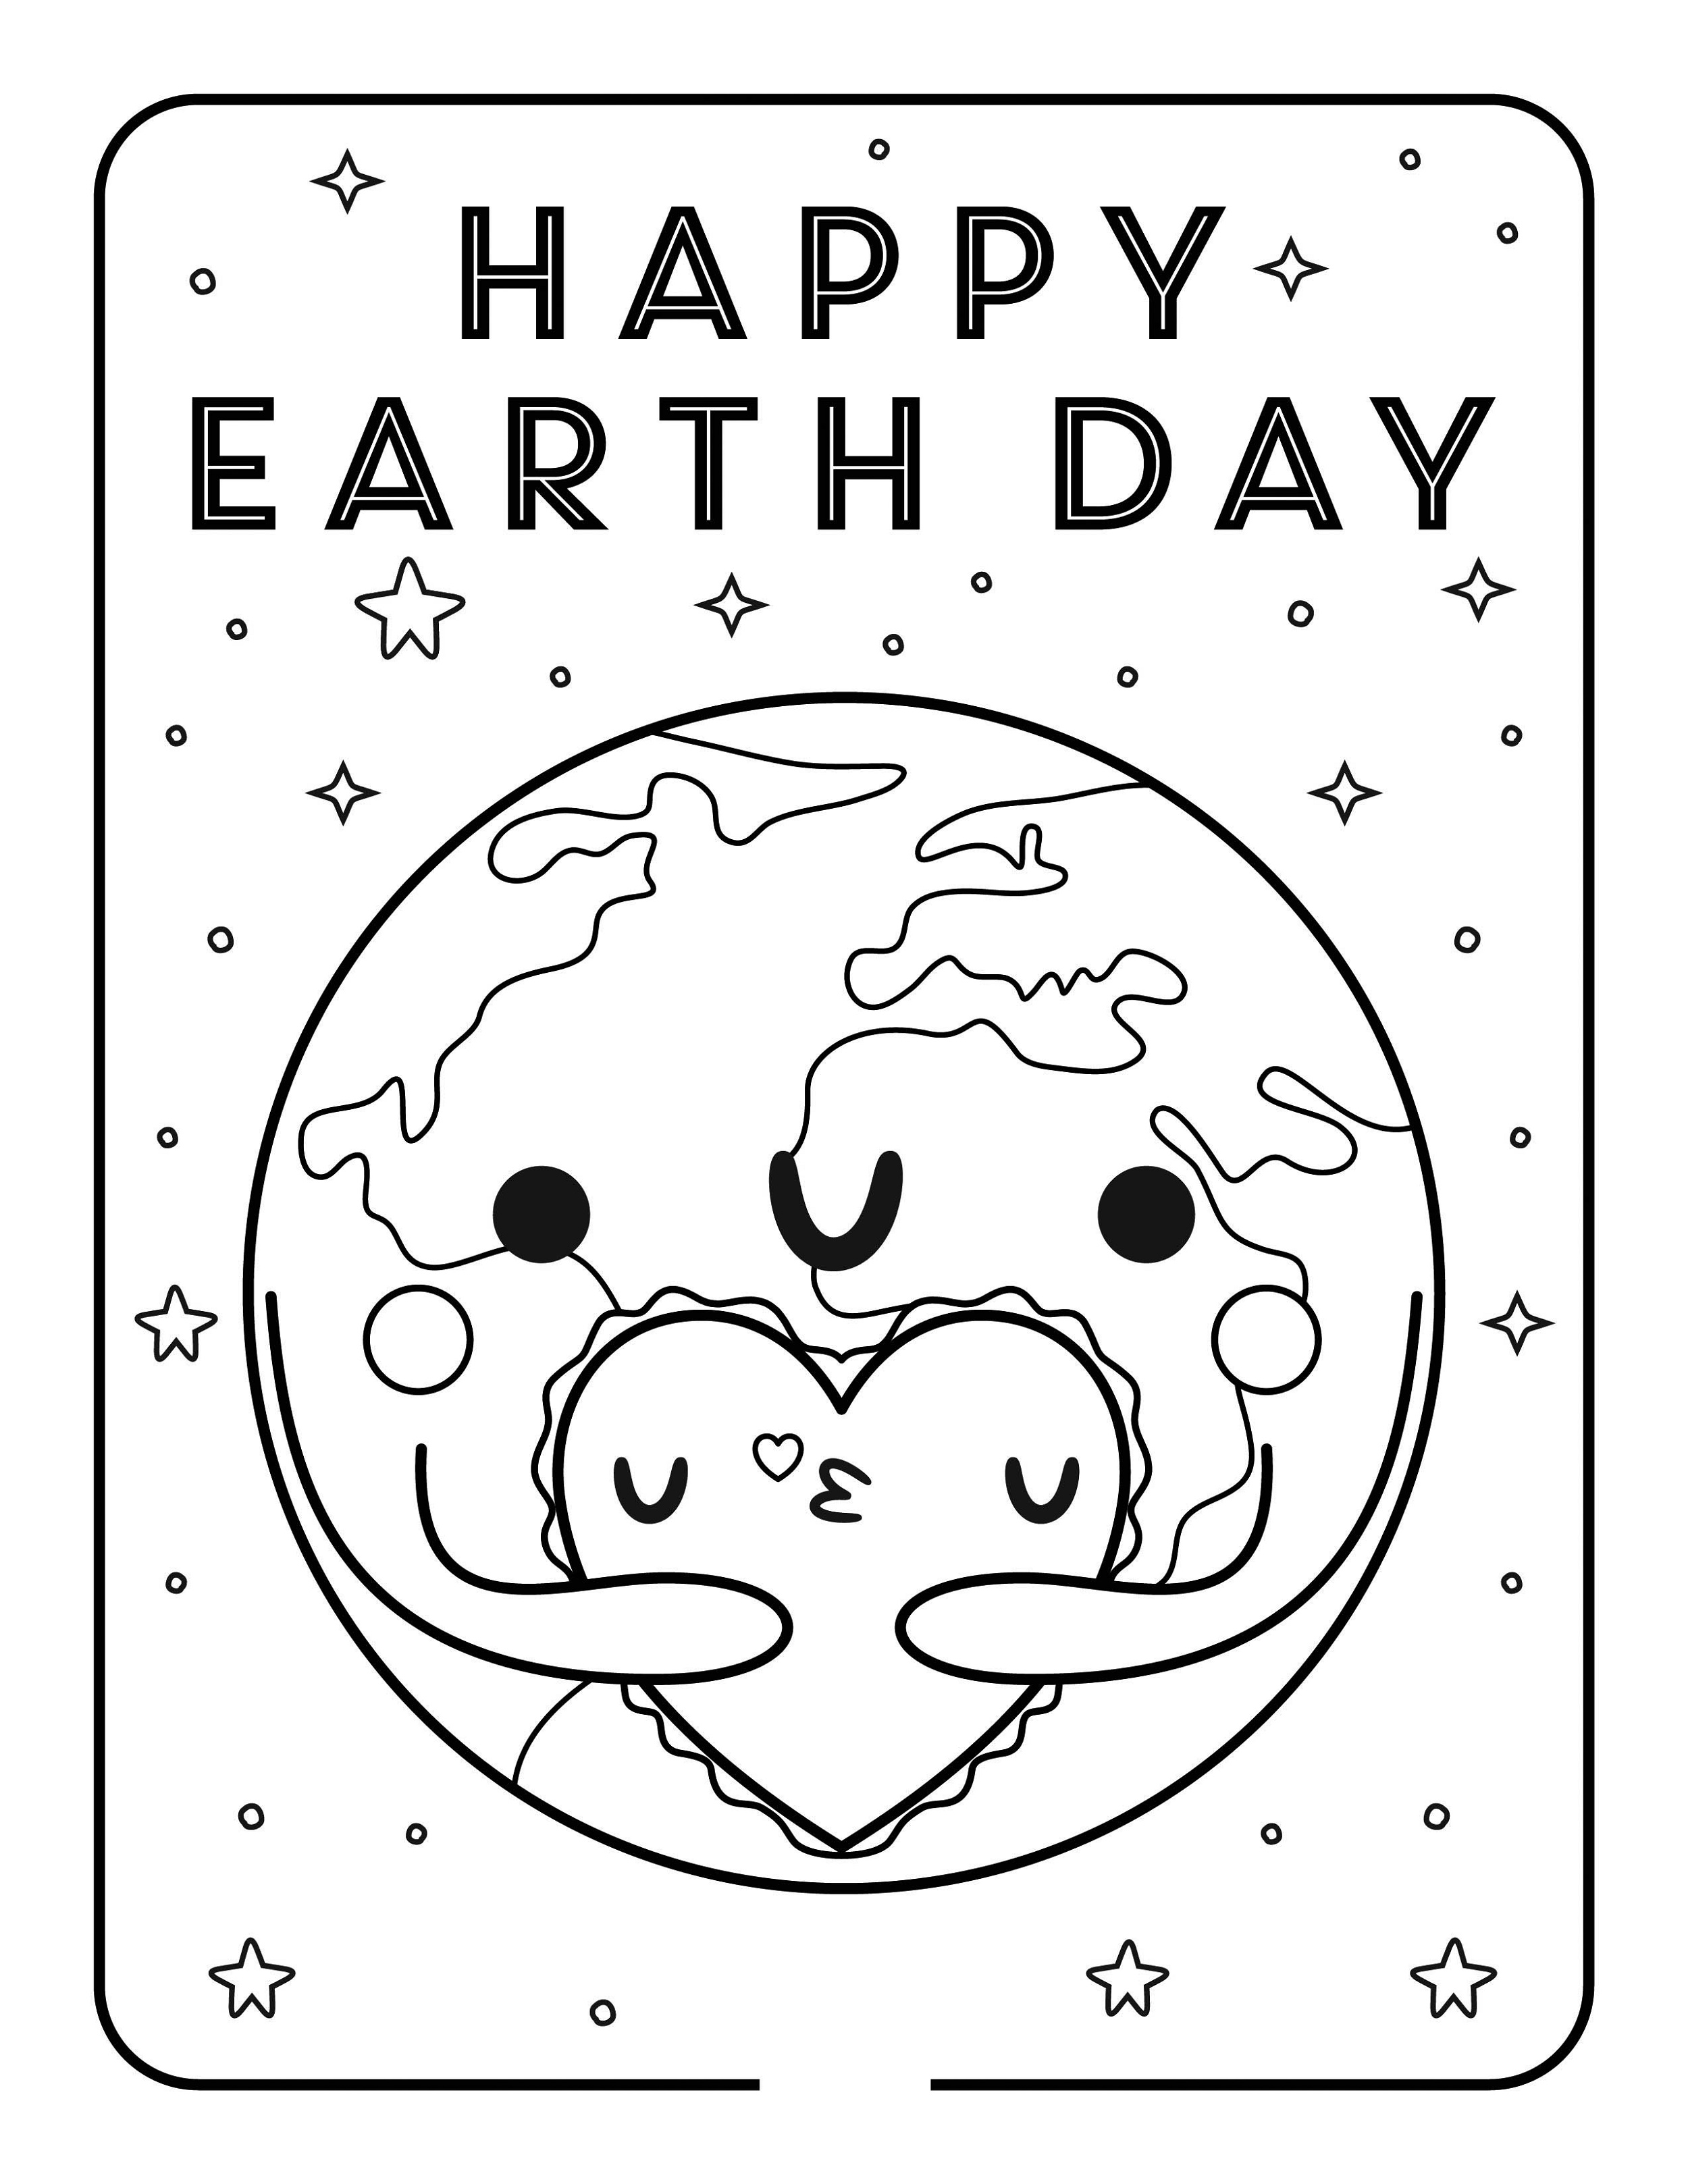 Earth-Day-Coloring-Pages-Cute